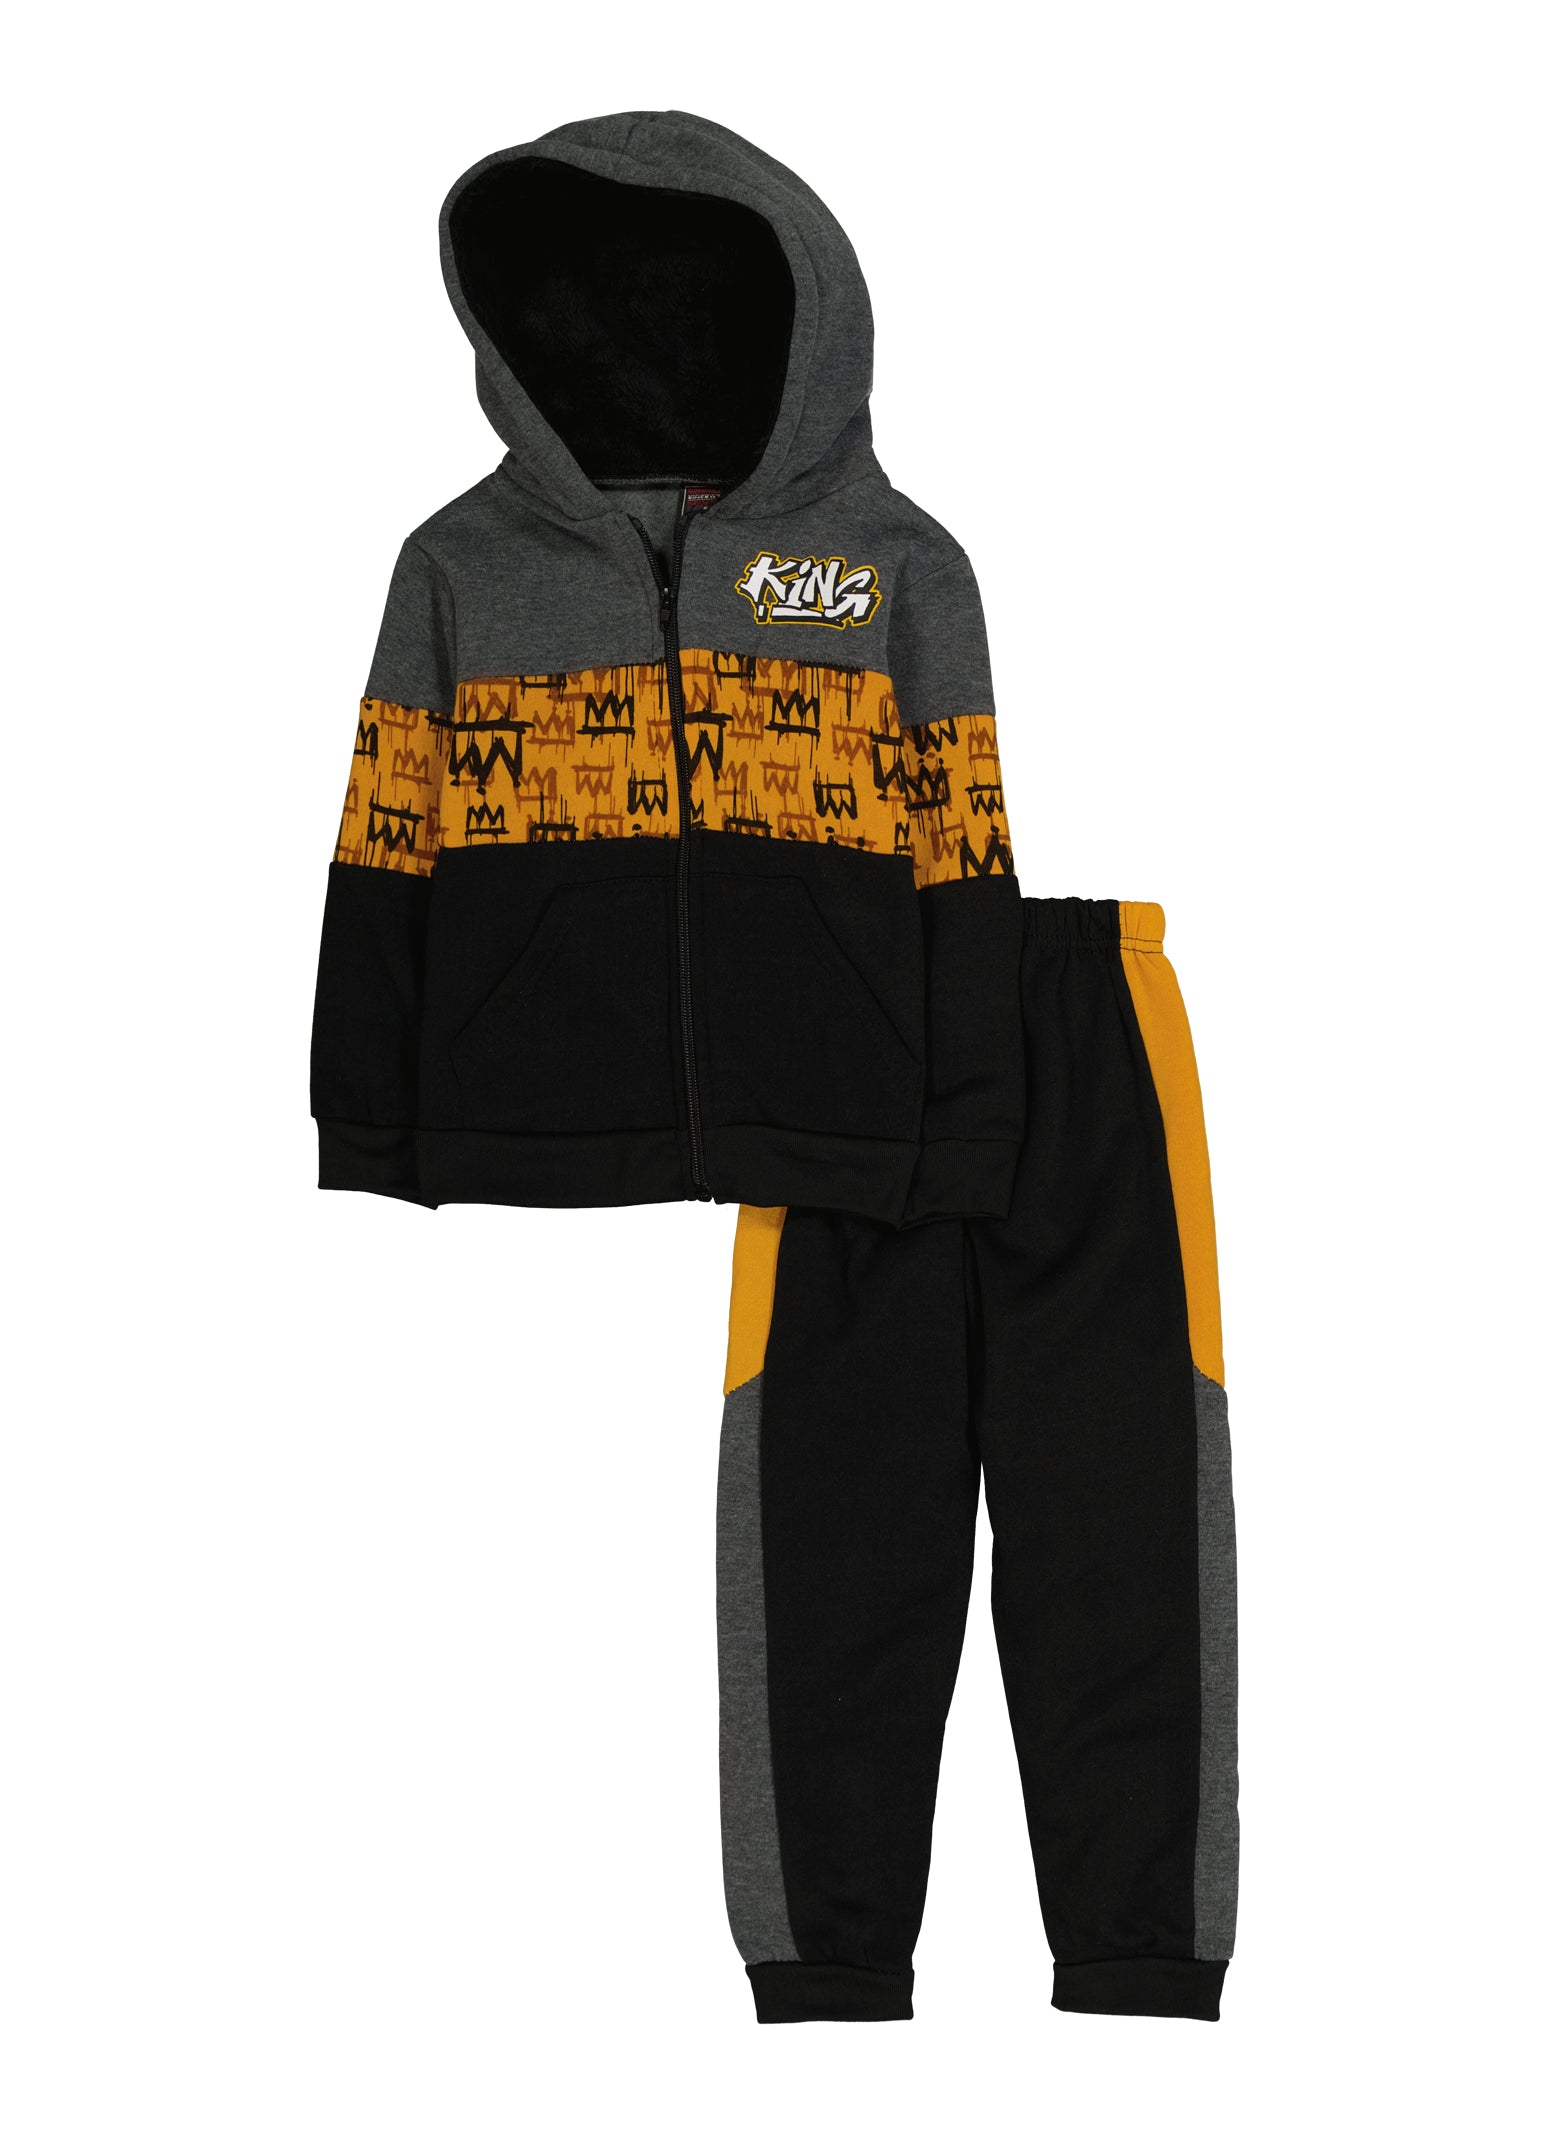 Little Boys King Graphic Zip Front Hoodie and Joggers, Multi, Size 5-6